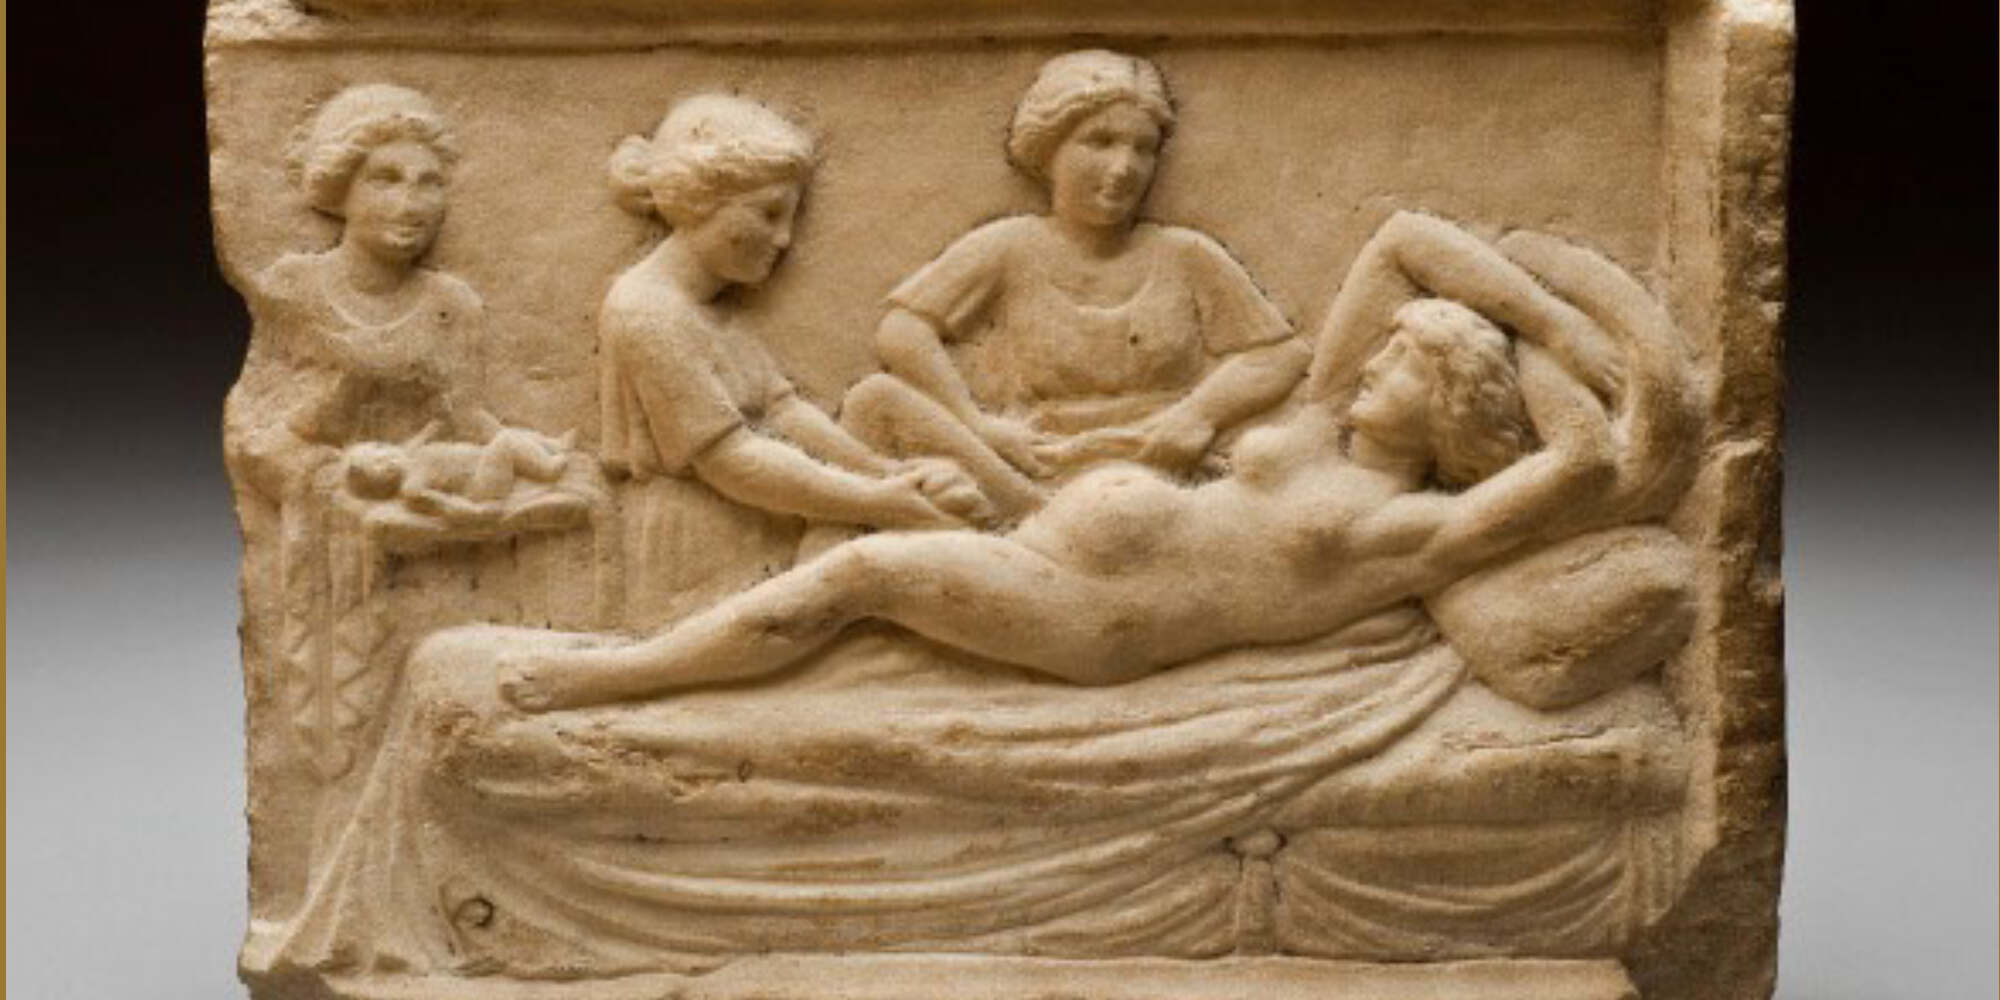 Ancient Athenian Women and the issue of abortion